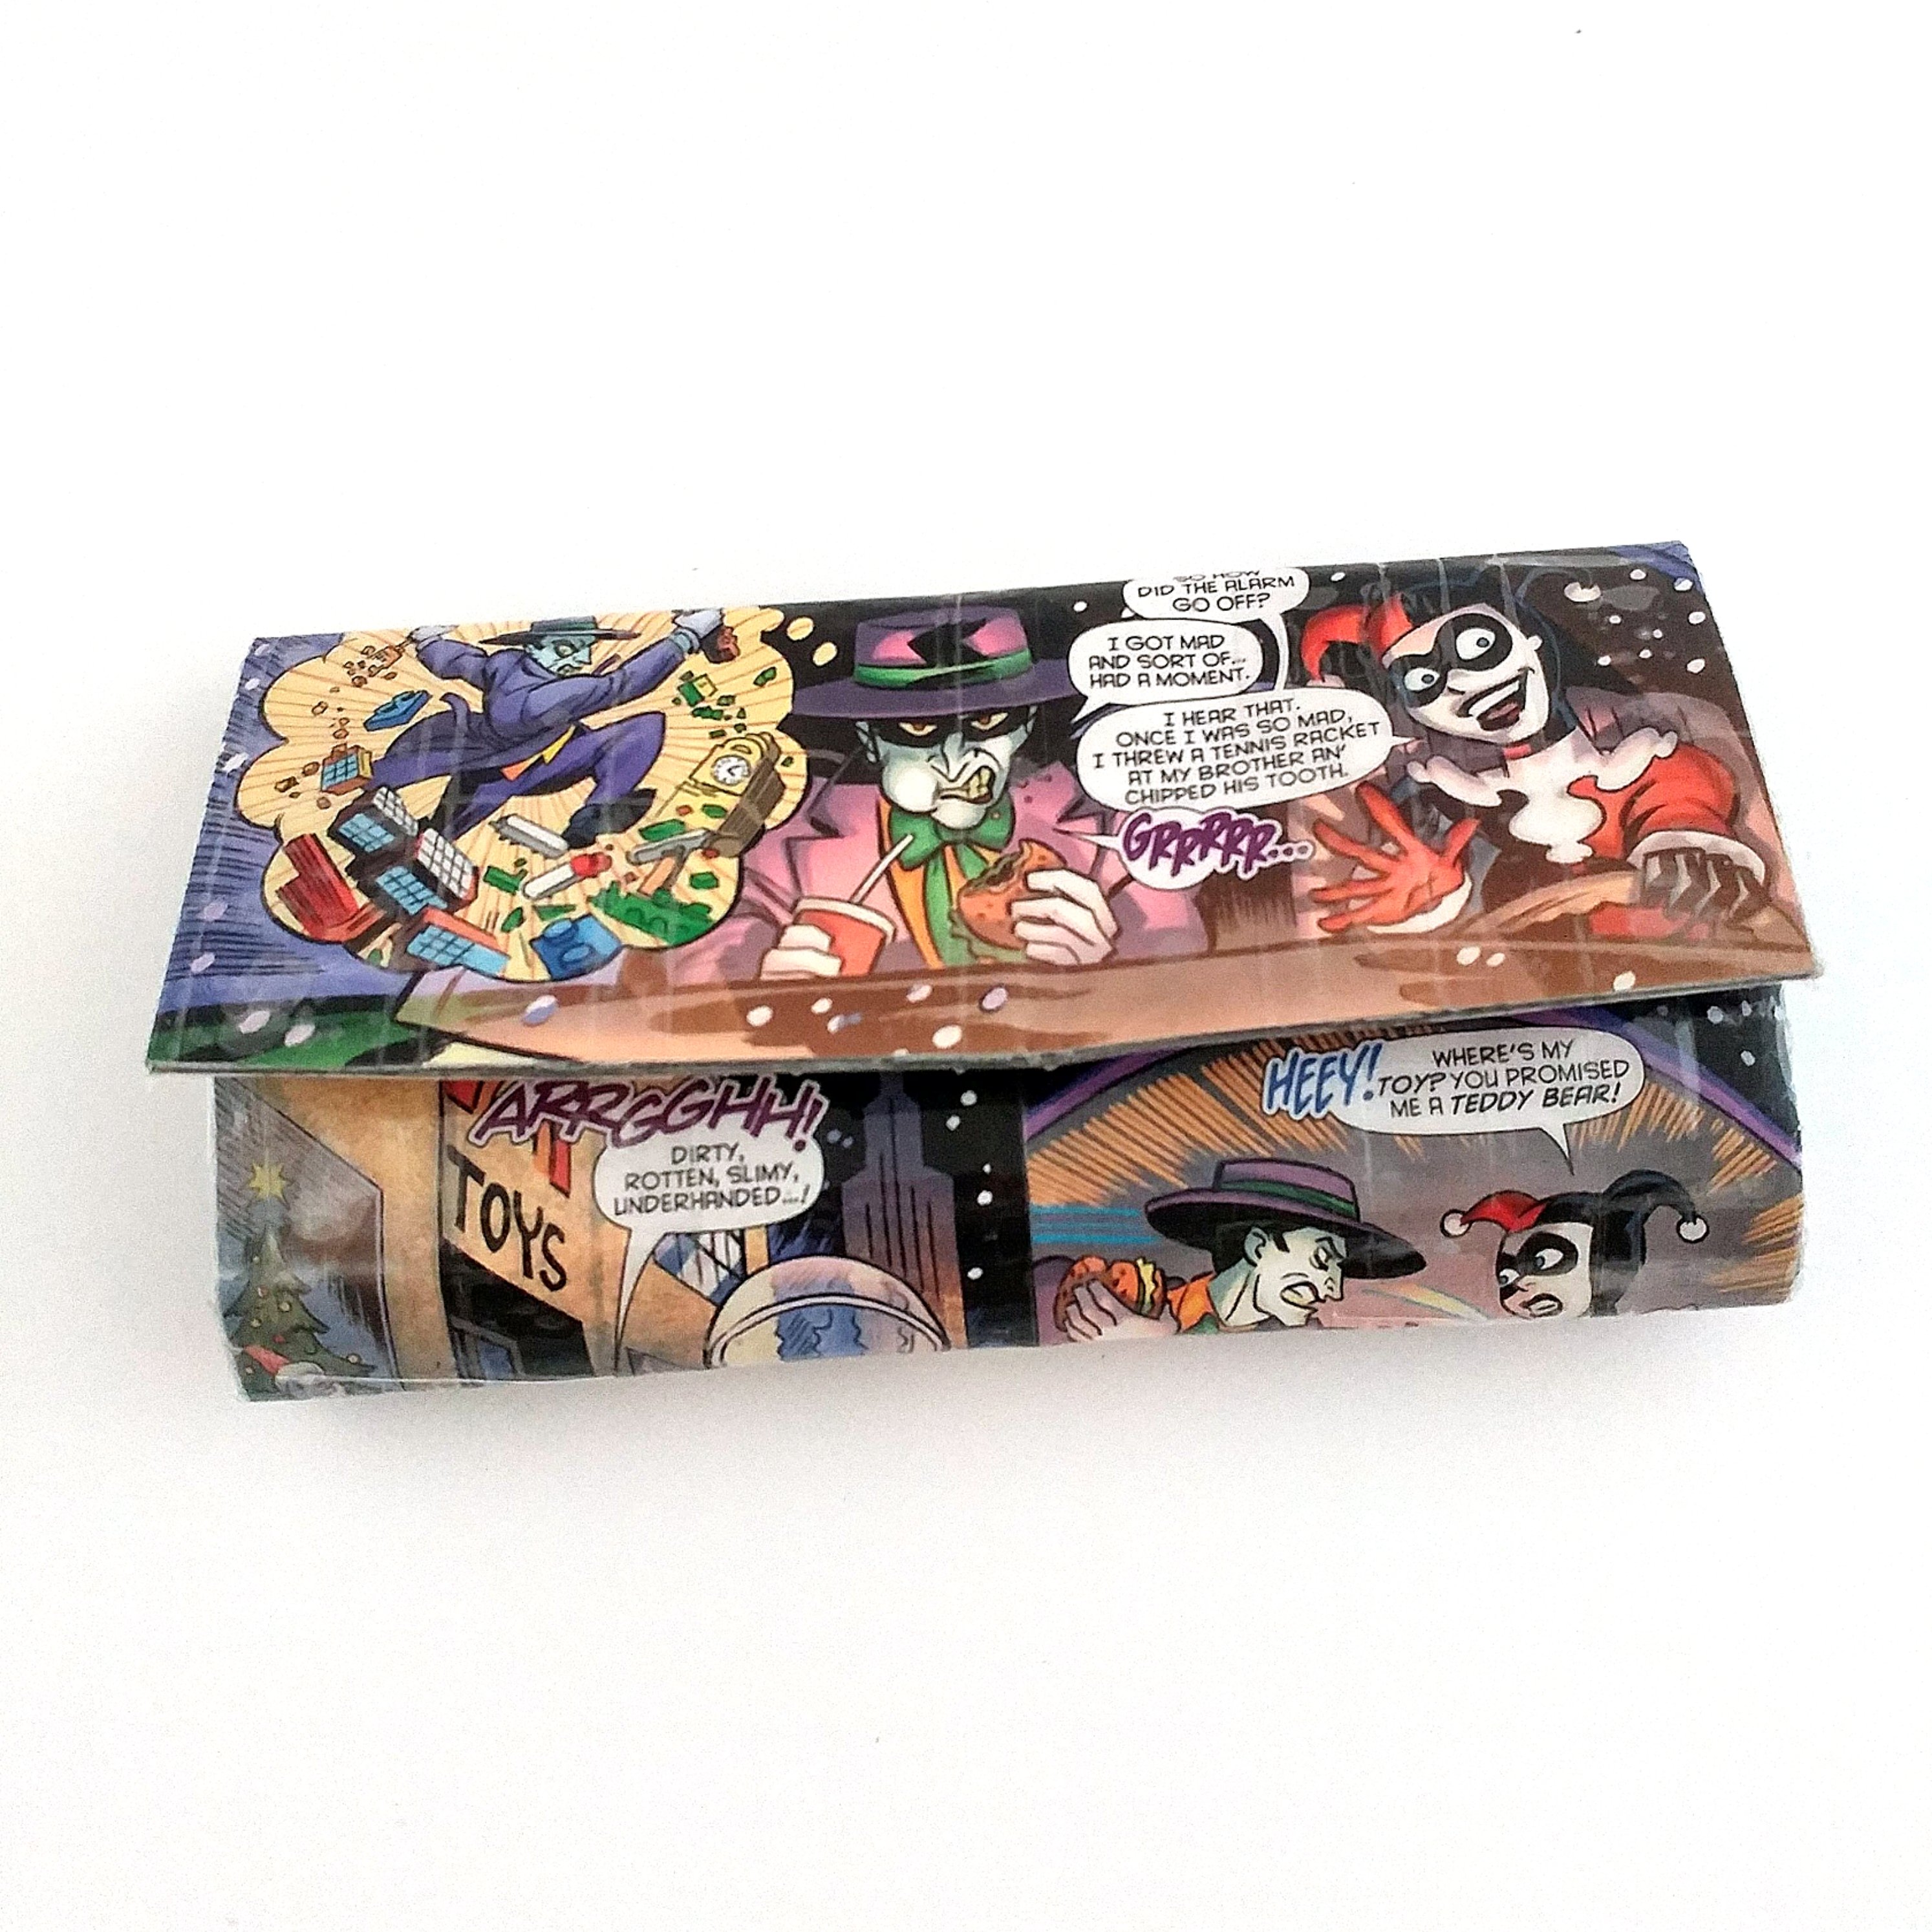 Harley Quinn and the Joker long clutch style women's wallet made from a Harley Quinn comic book. 